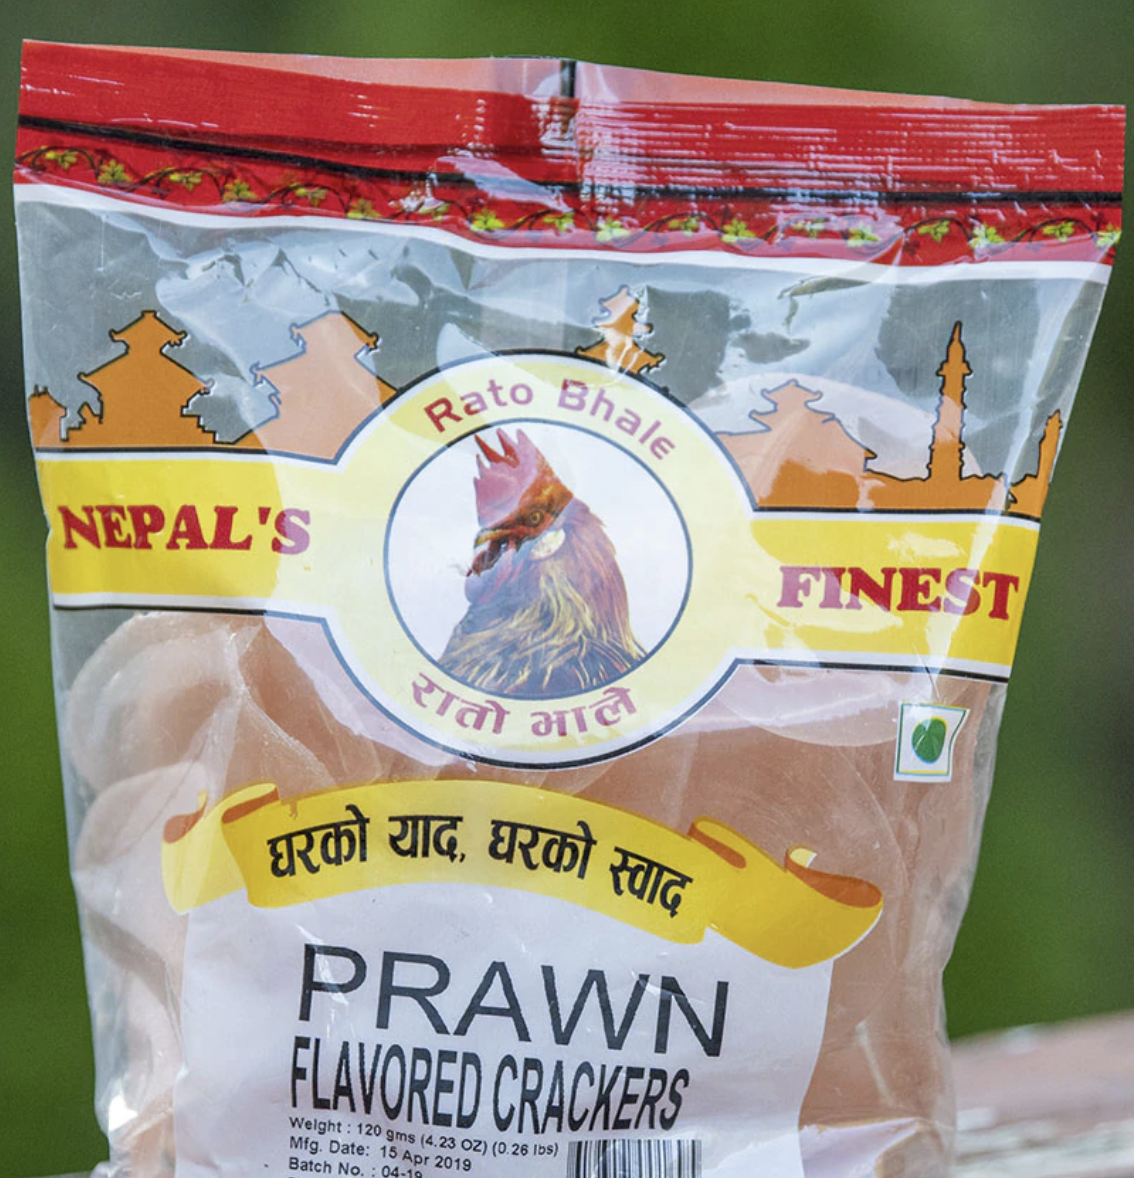 Rato Bhale - Prawn Flavored Crackers